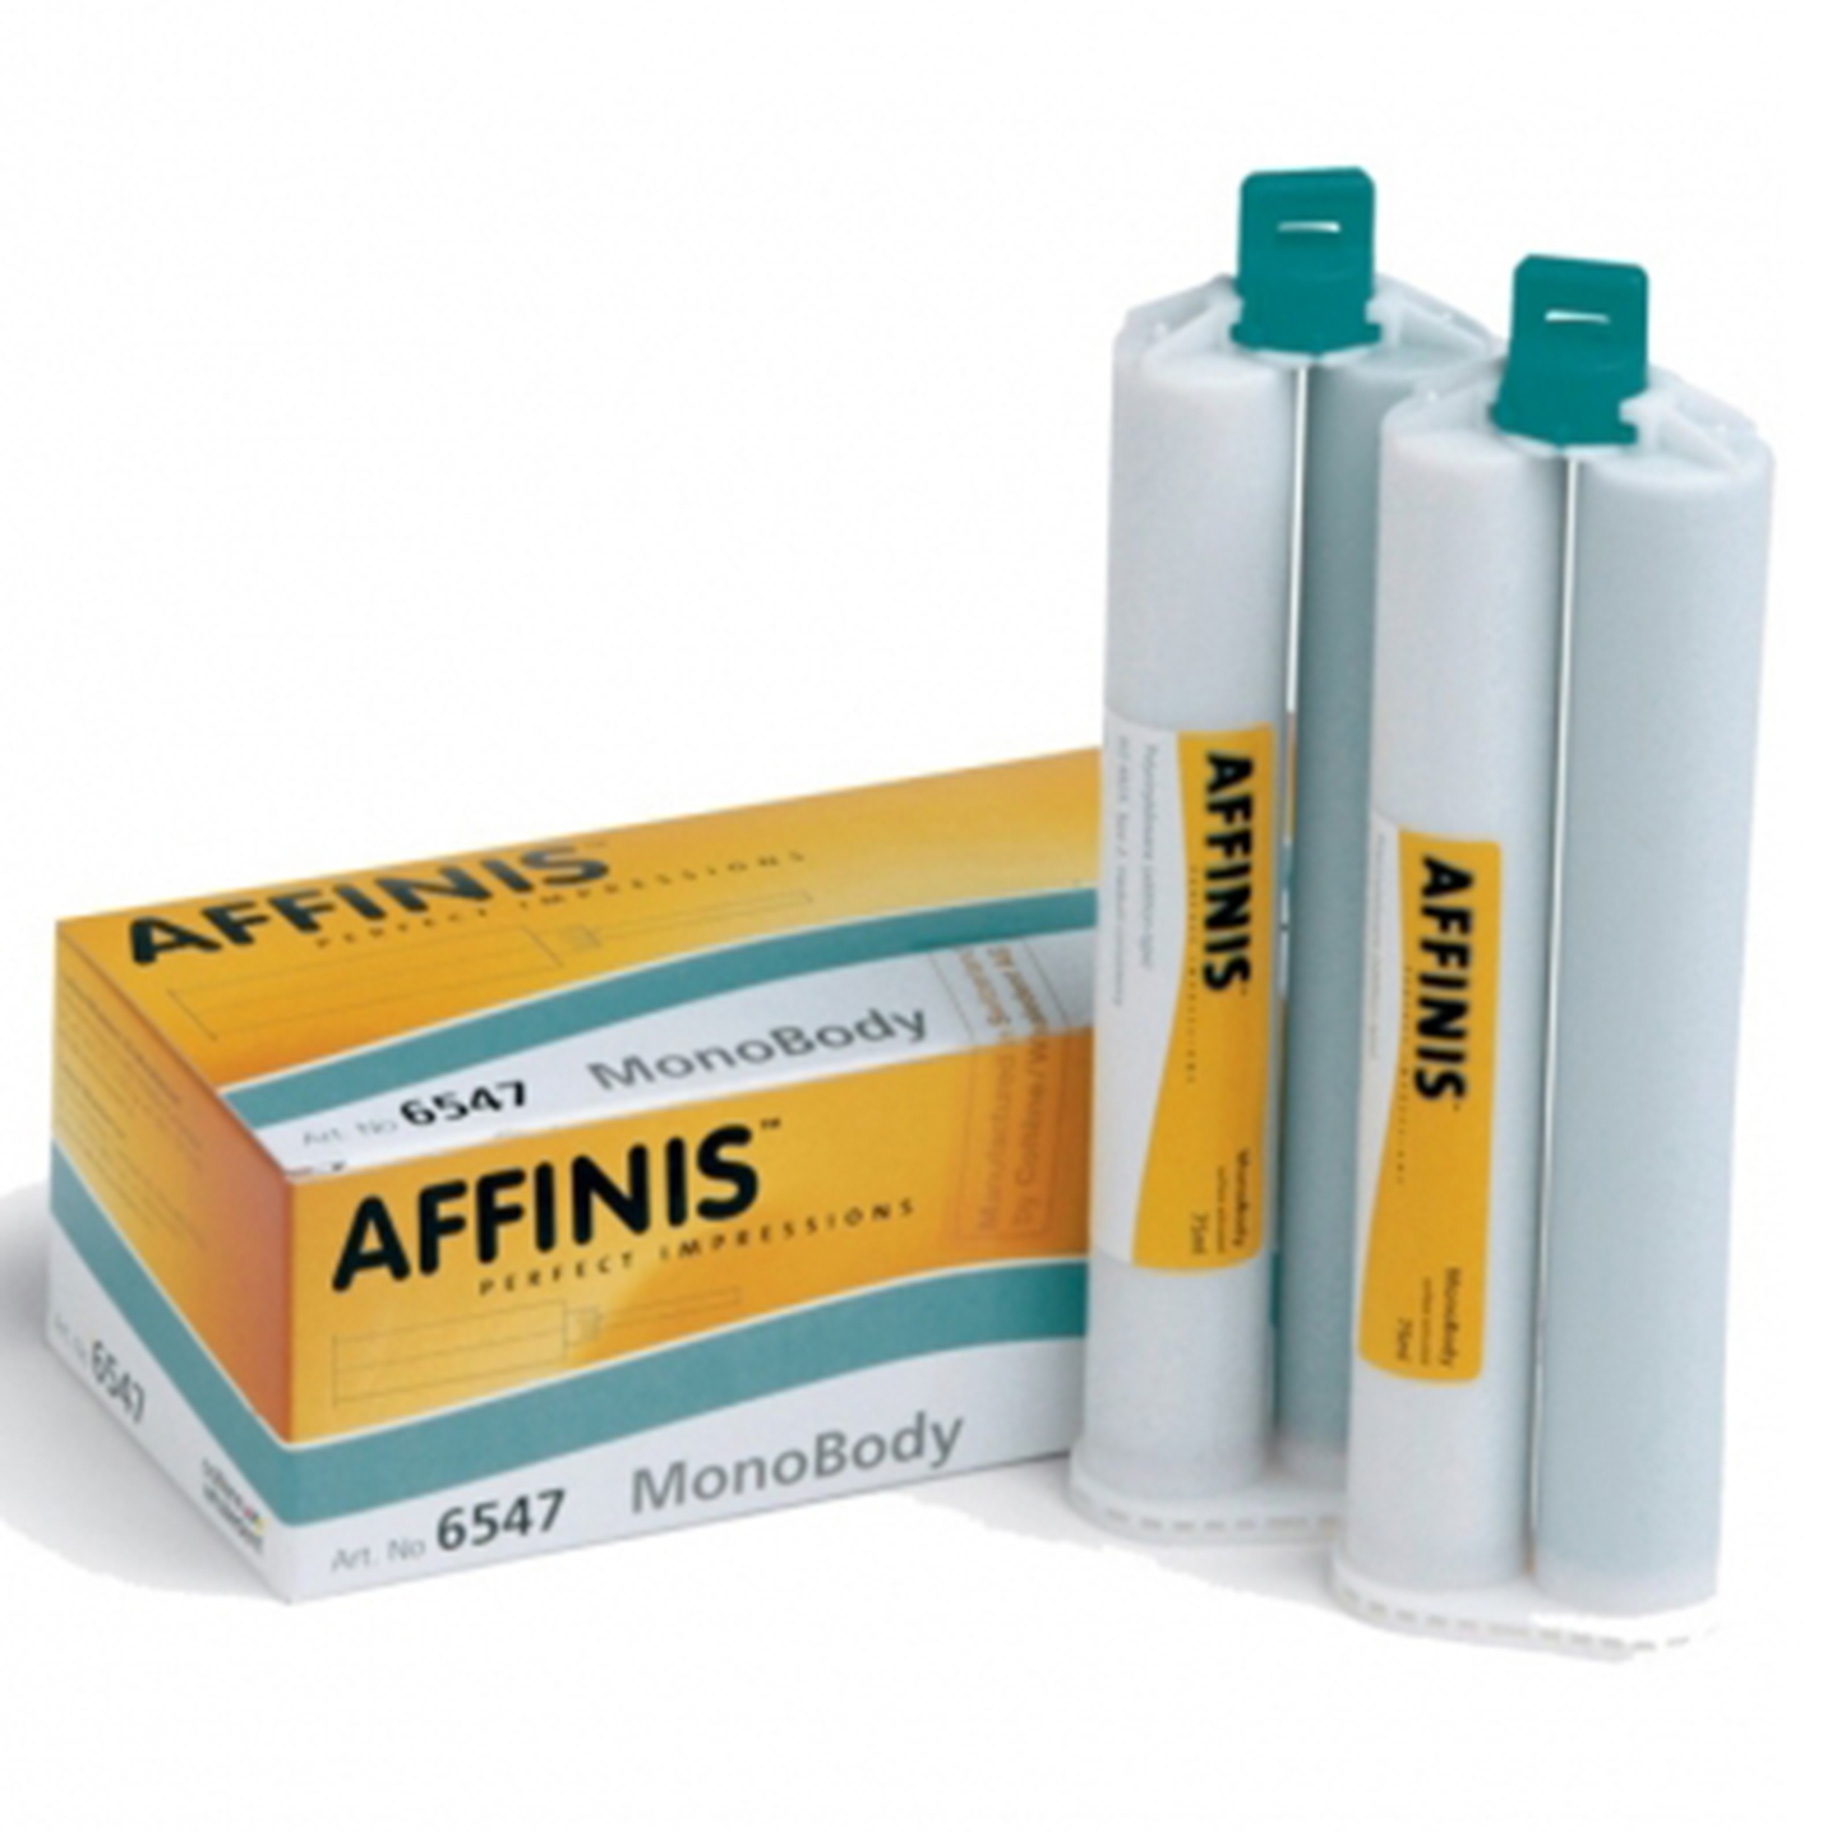 Affinis Impression Material Wash Material - Monobody (Ref. 6547) Single Pack 